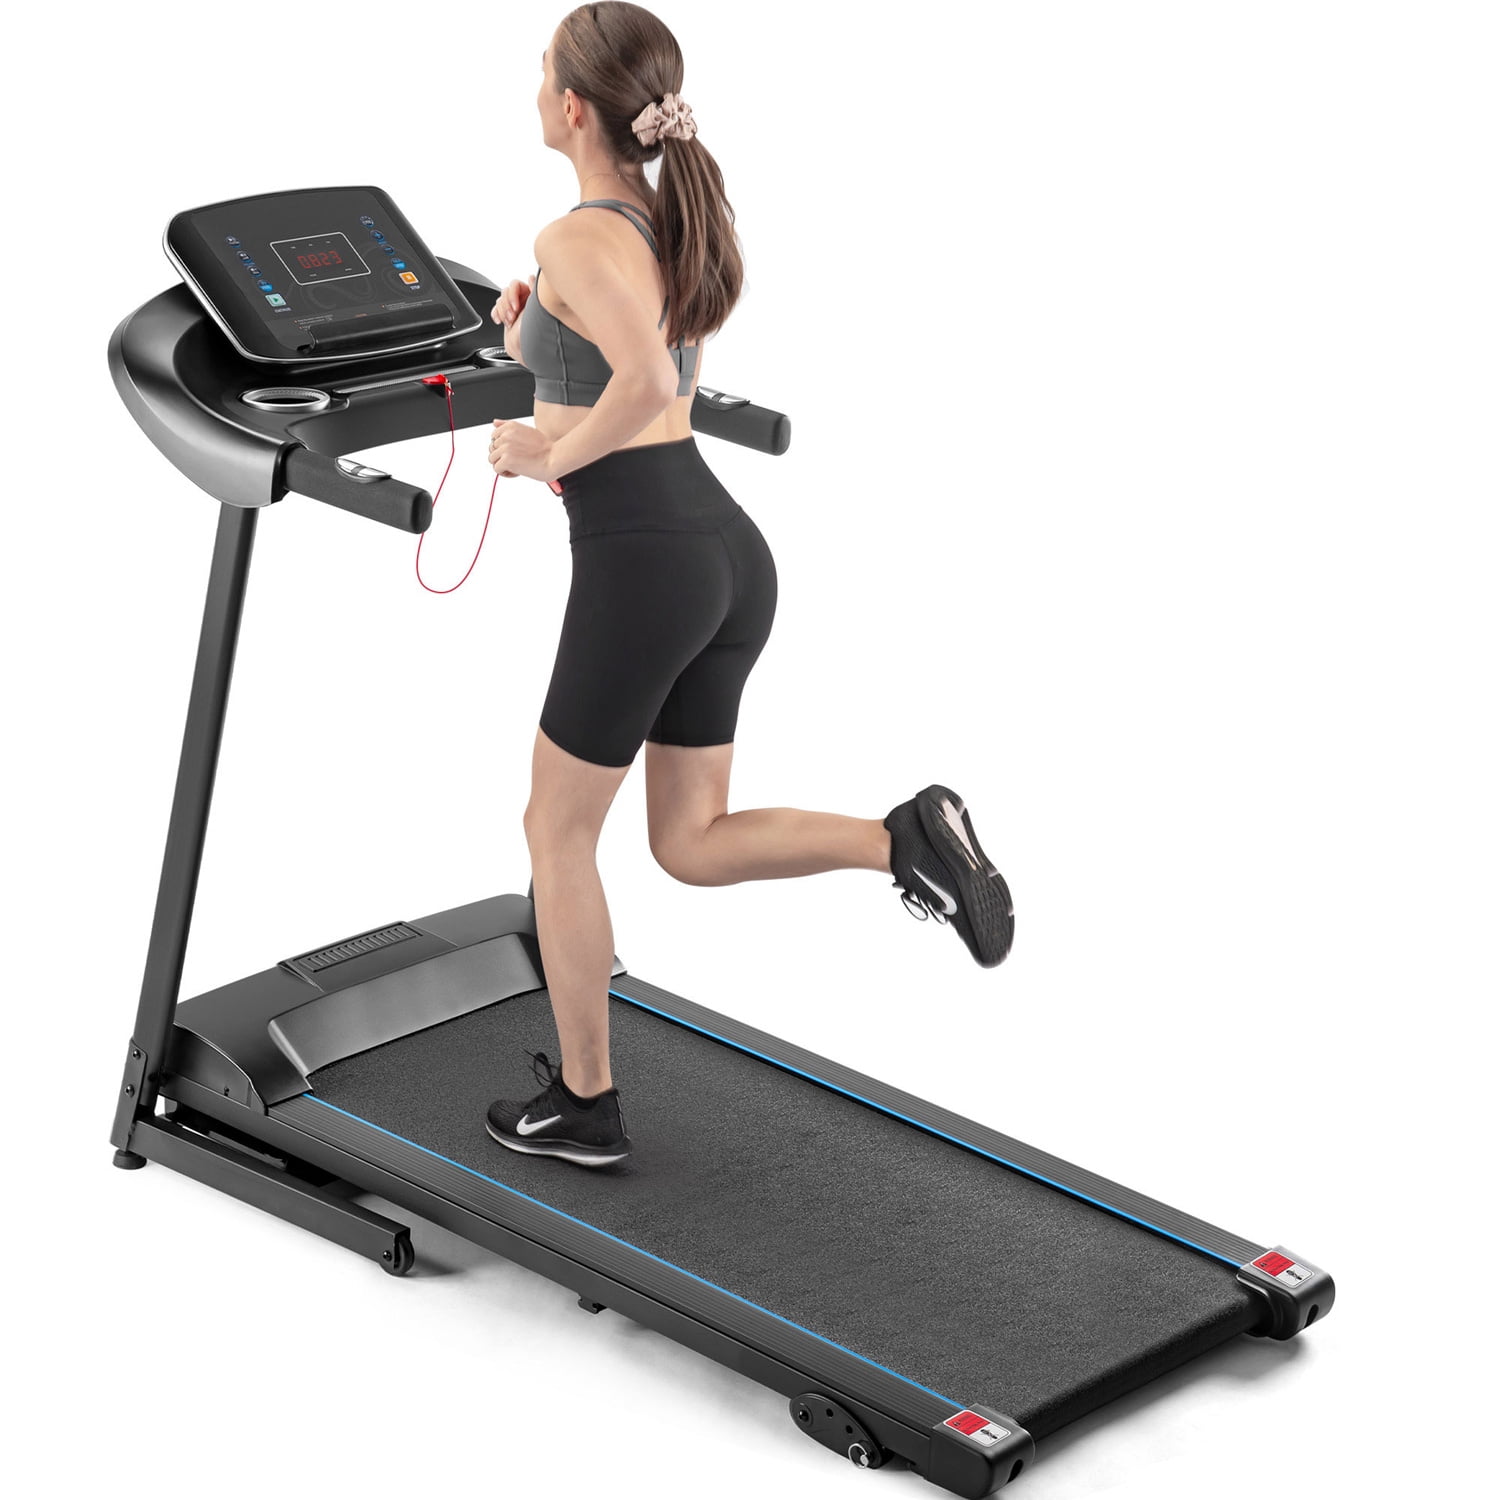 Details about   Folding Manual Treadmill working Machine Cardio Fitness Exercise Incline Home 